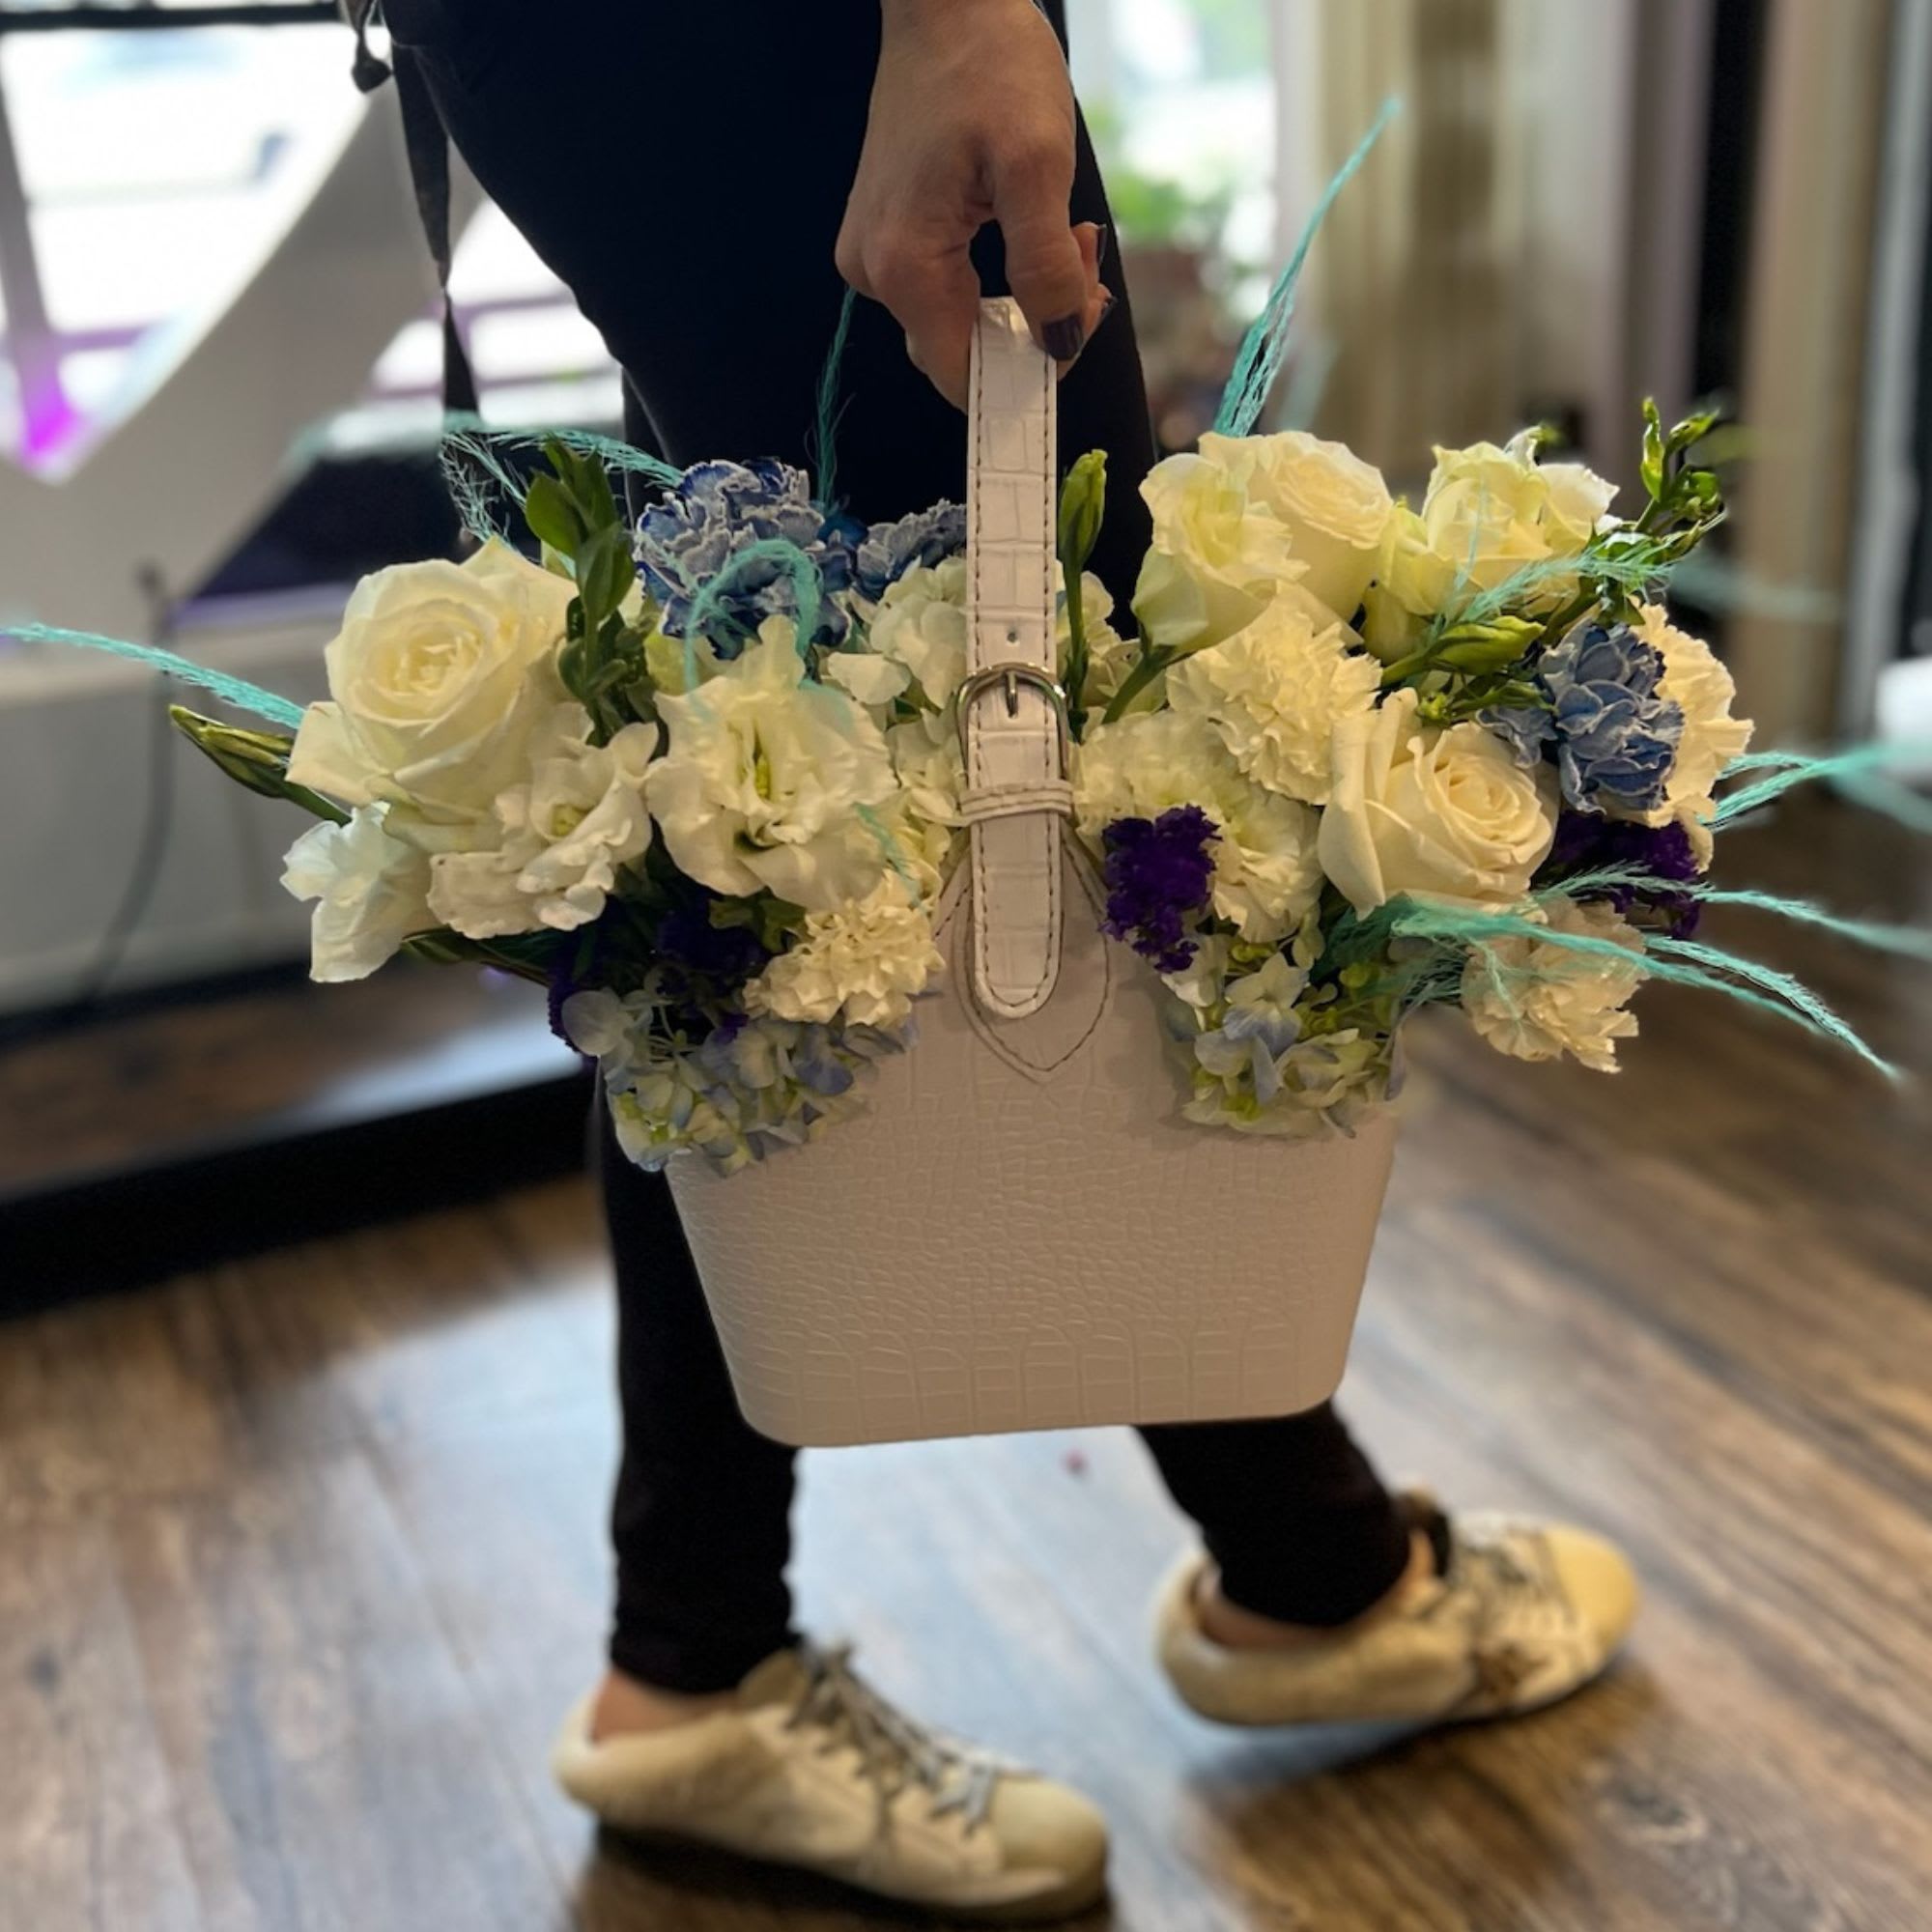 Flower Arrangement in a bag - Simply tell us your favorite color scheme for flowers and we will design a stunning floral arrangemet just for you.